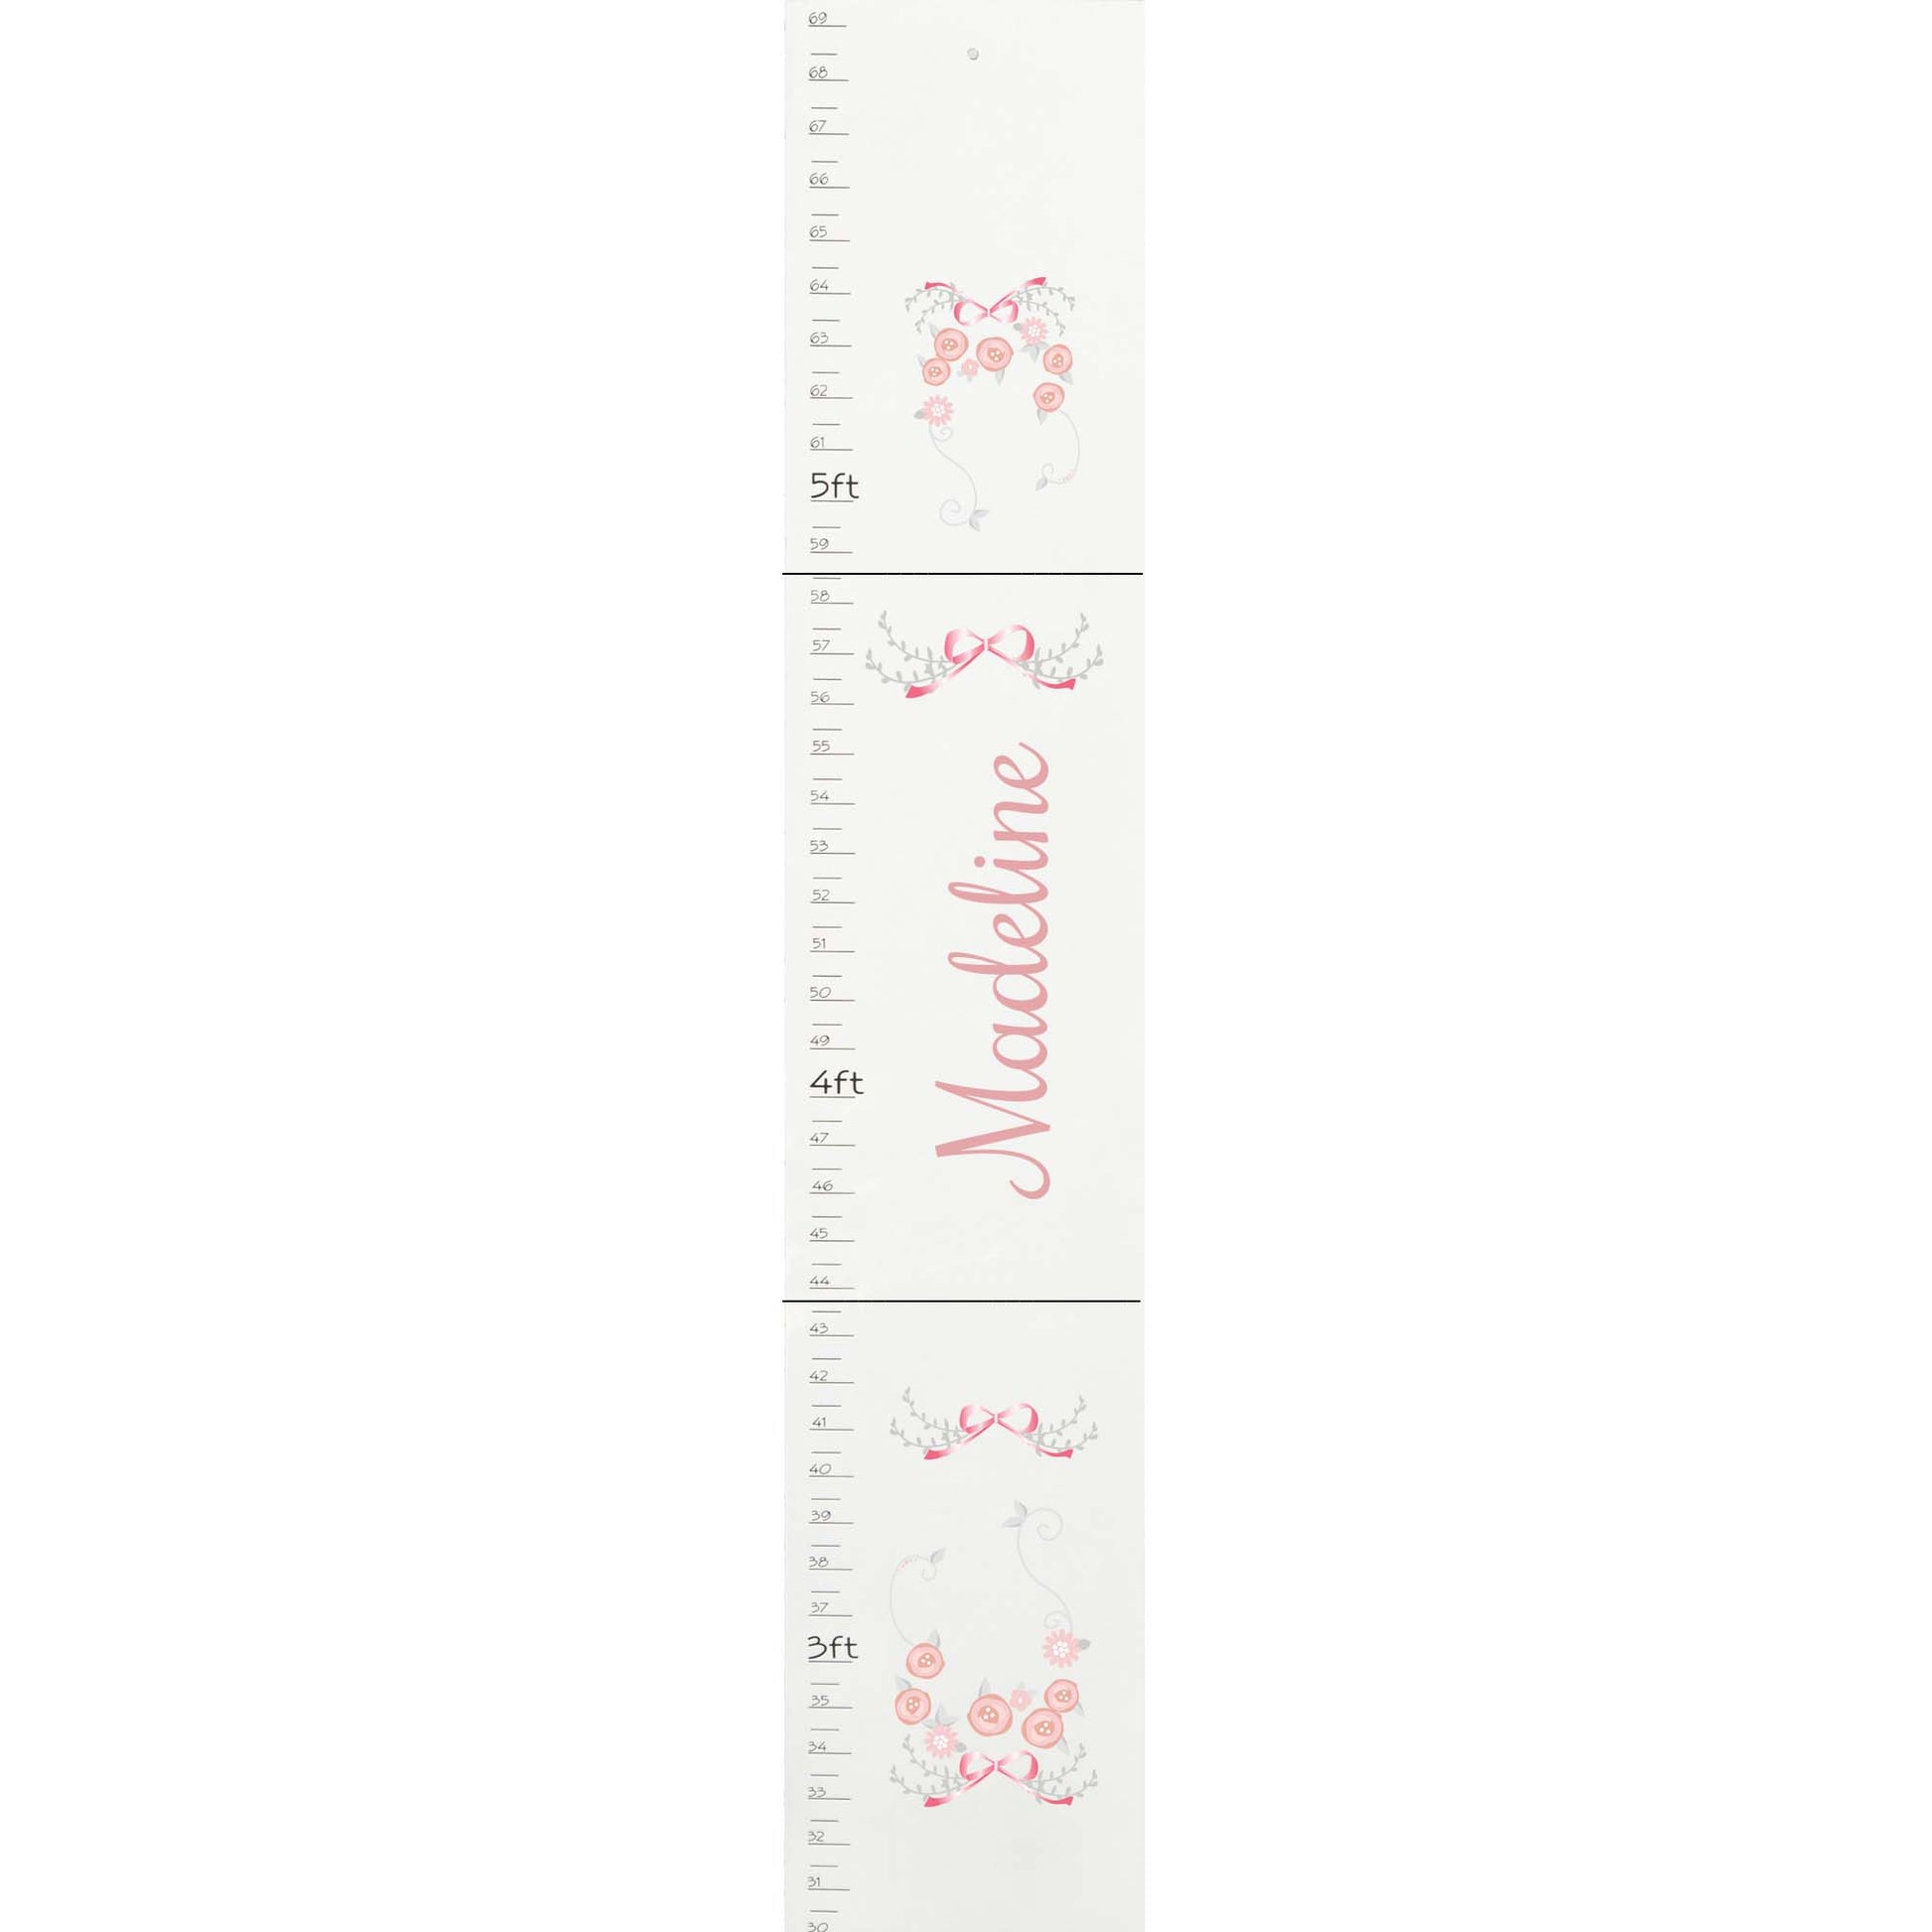 Personalized White Growth Chart With Garland Pink Gray Design